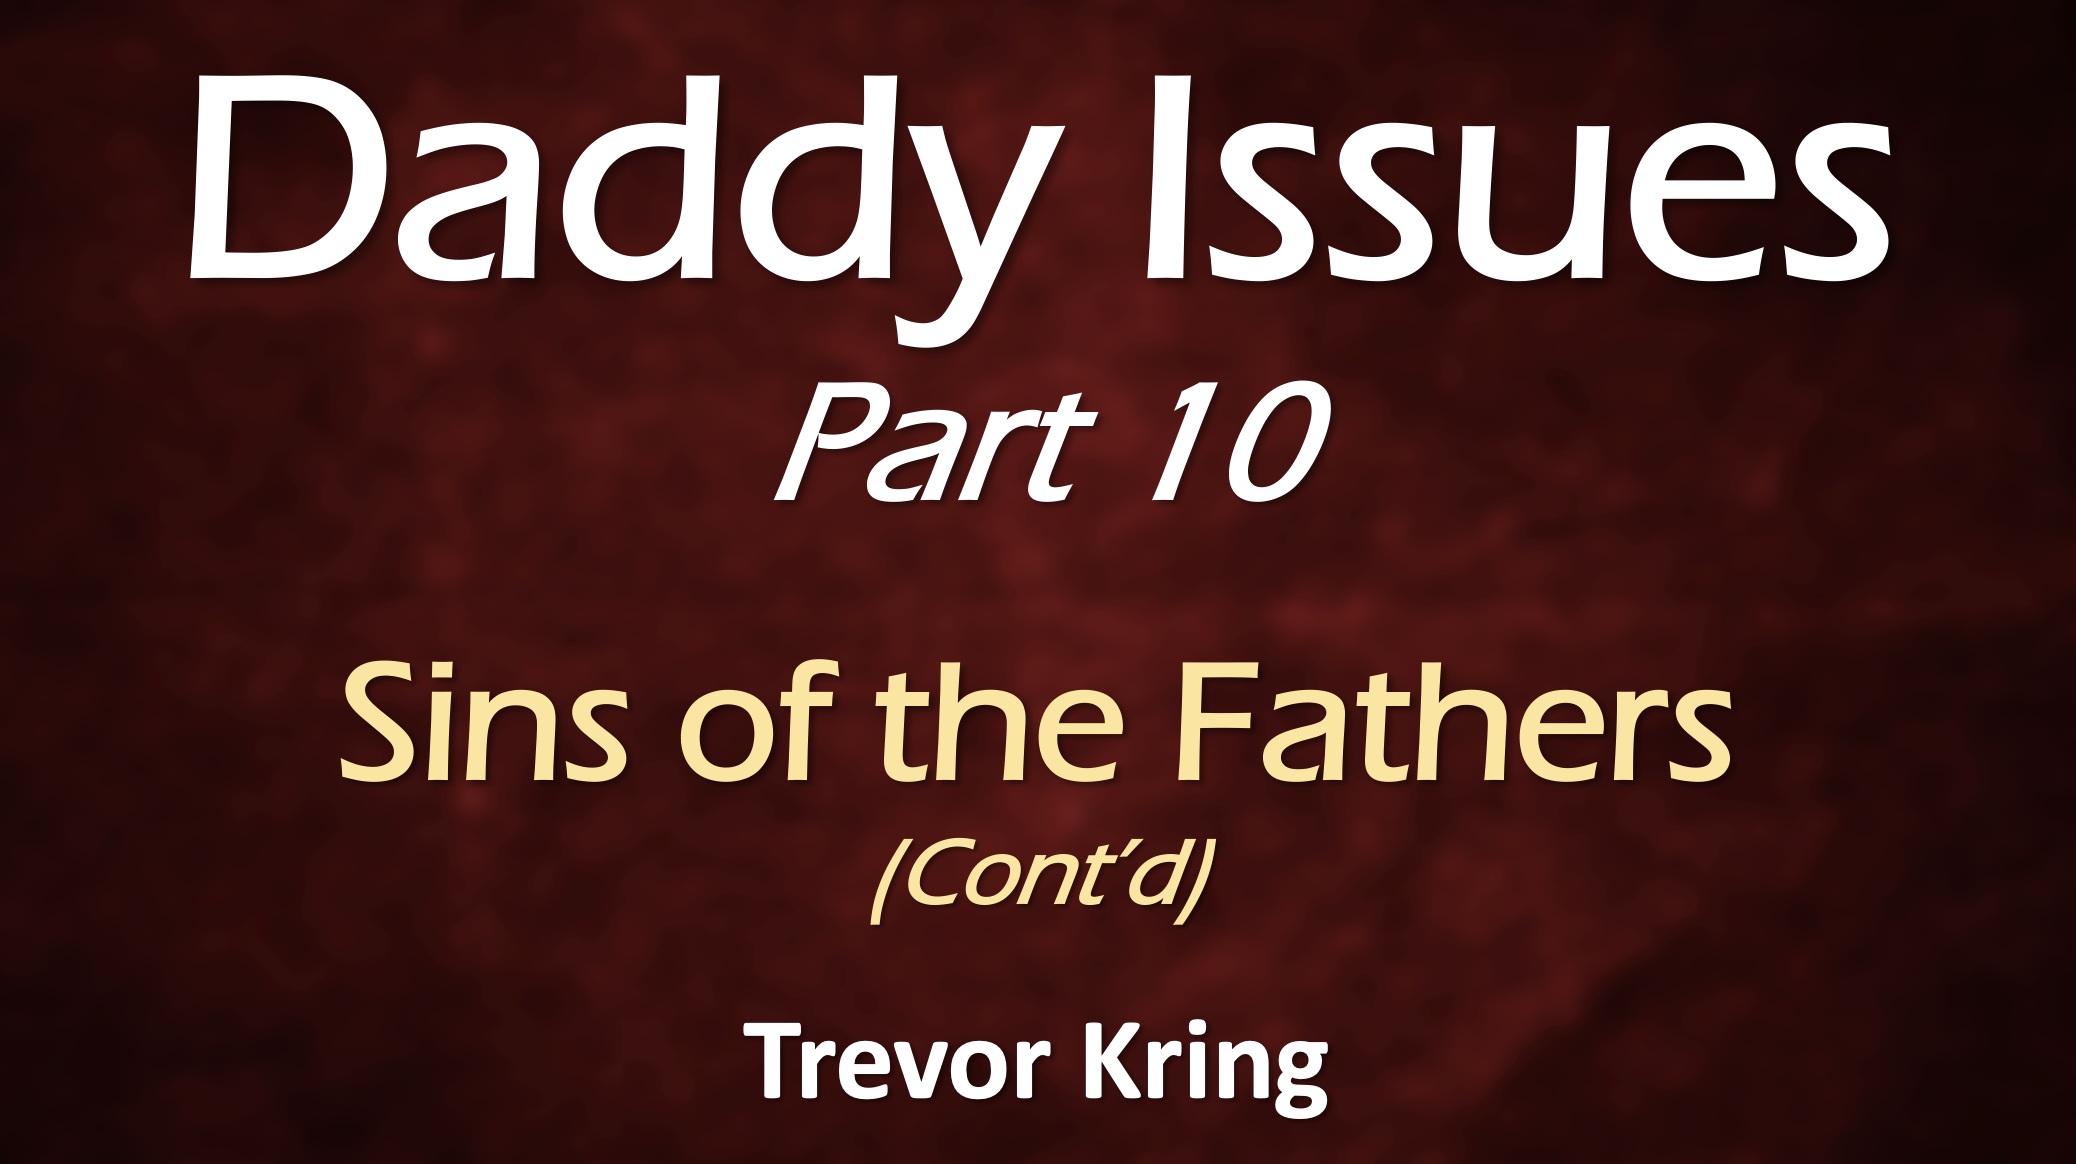 Daddy Issues Part 10- Sins of the Father (Cont'd)